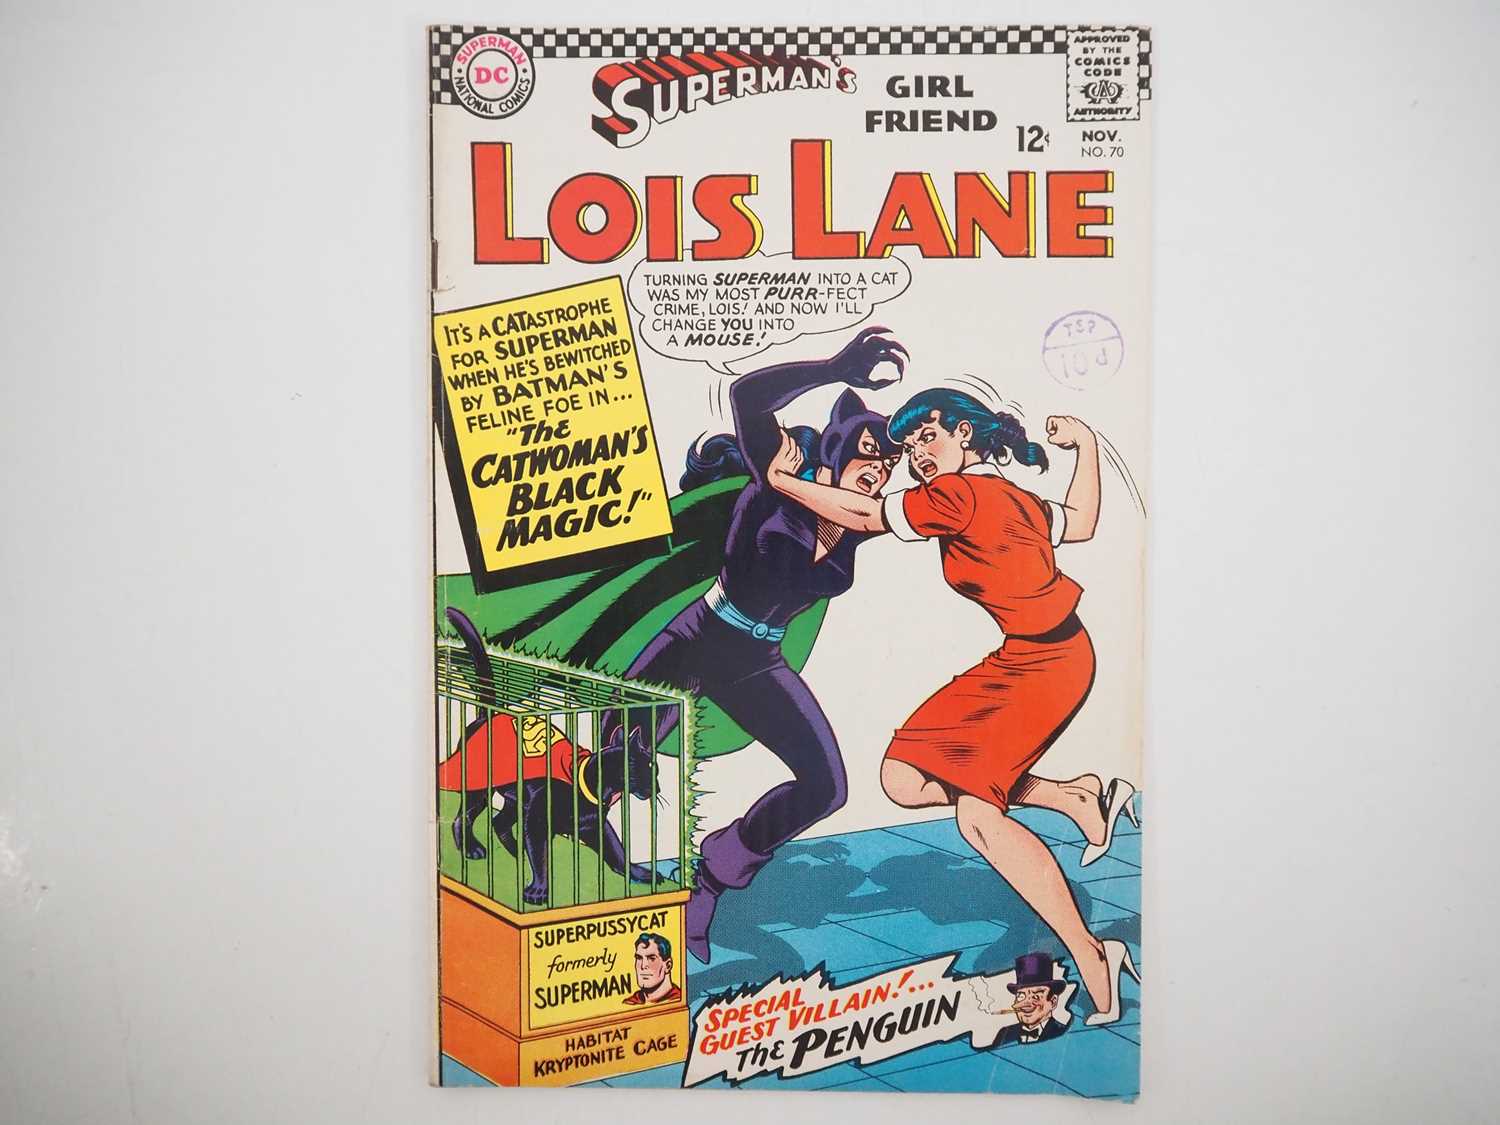 SUPERMAN'S GIRLFRIEND, LOIS LANE #70 (1966 - DC) - KEY Book - First Silver Age Catwoman appearance +